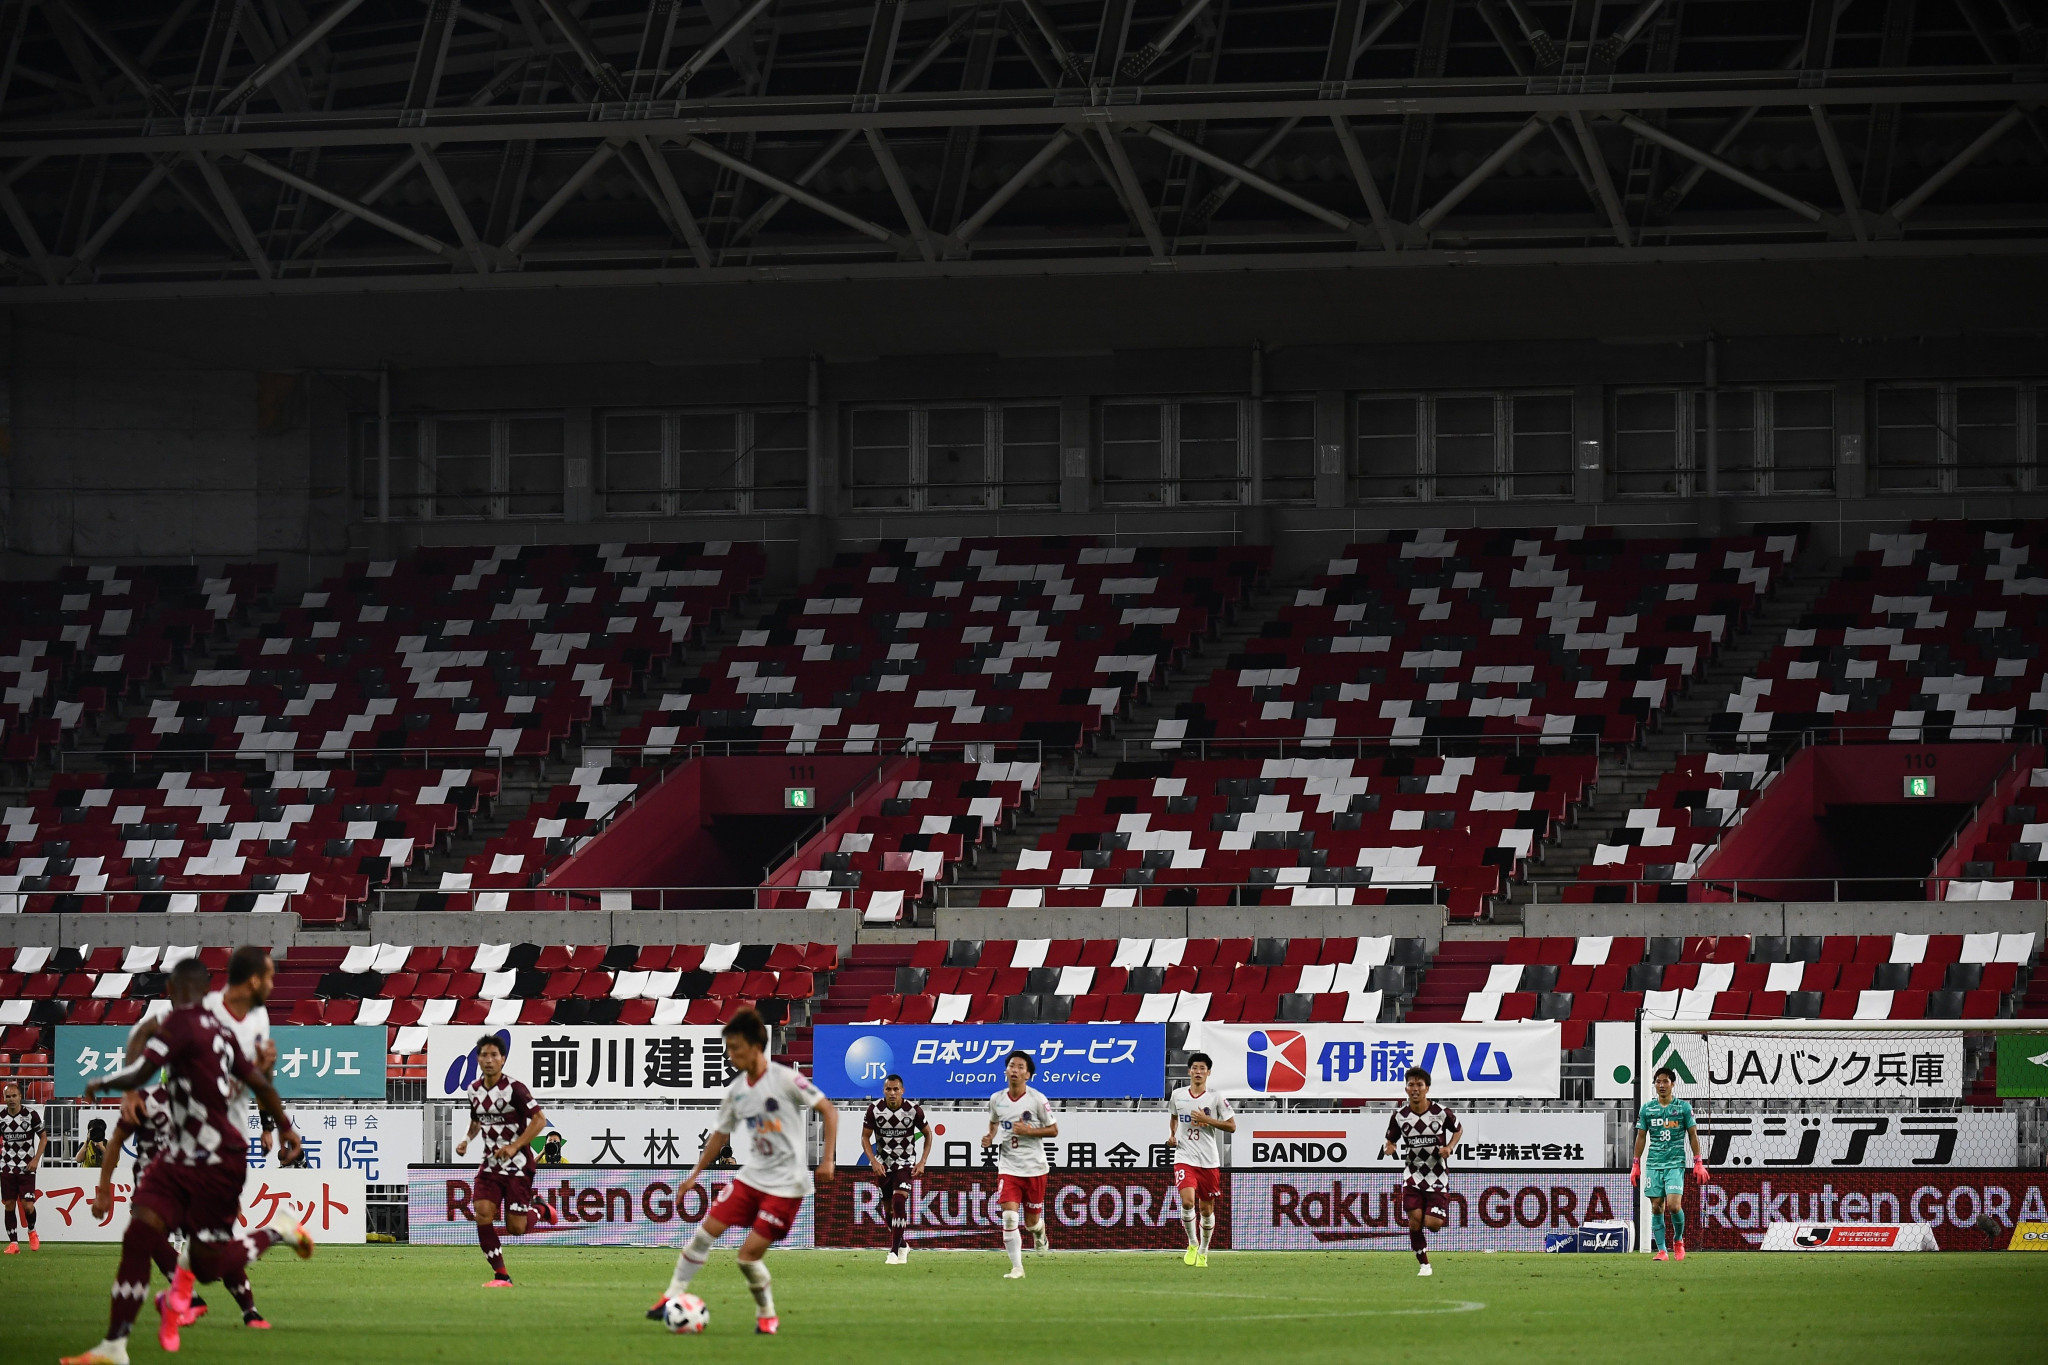 The J-League is among professional sporting events to resume with limited spectators ©Getty Images